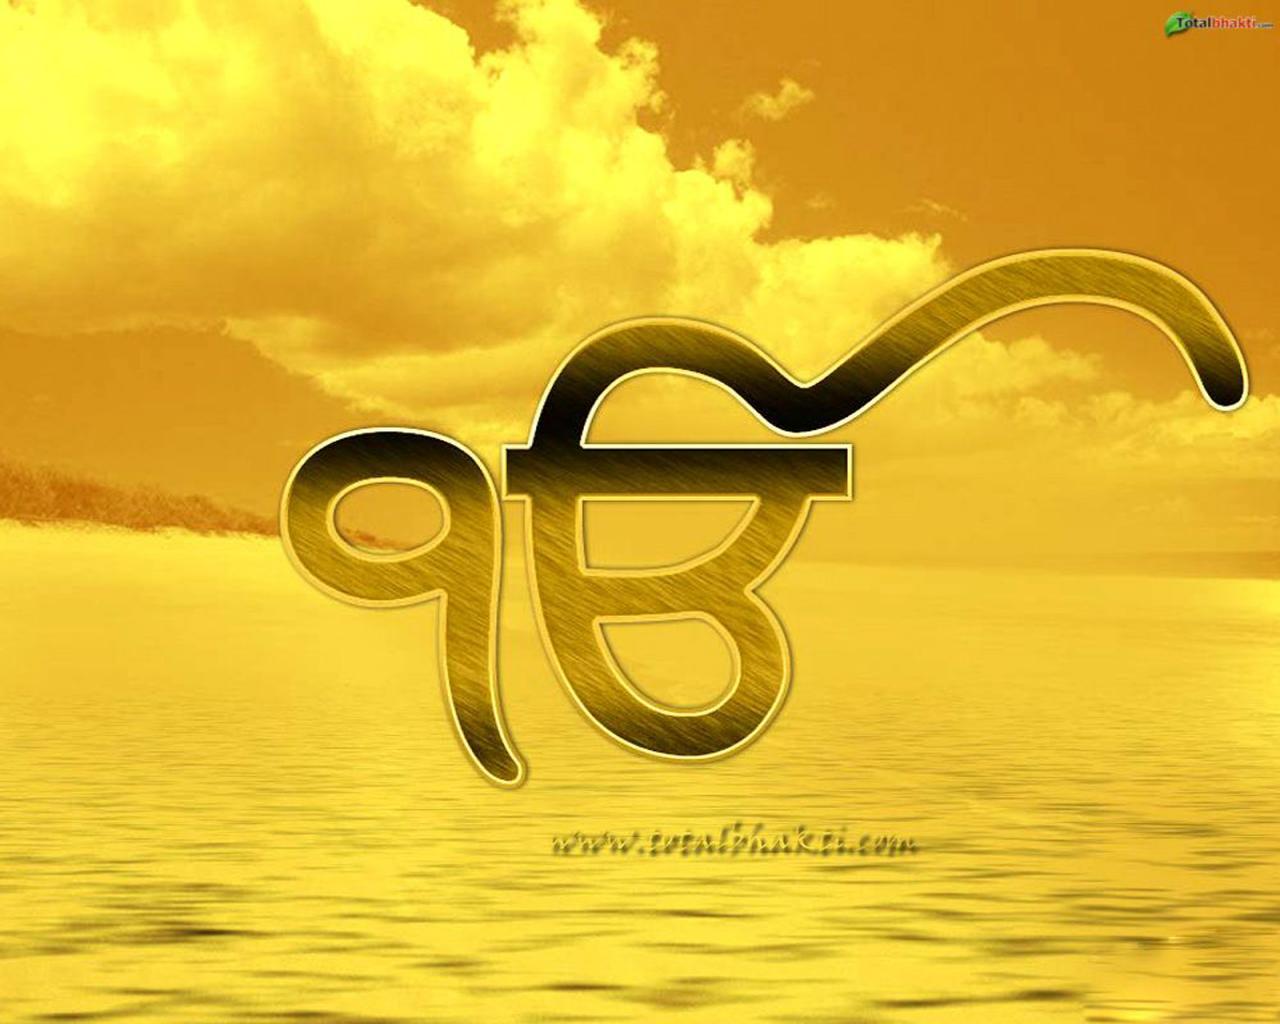 Sikh God Image 35508 HD Desktop Background and Widescreen